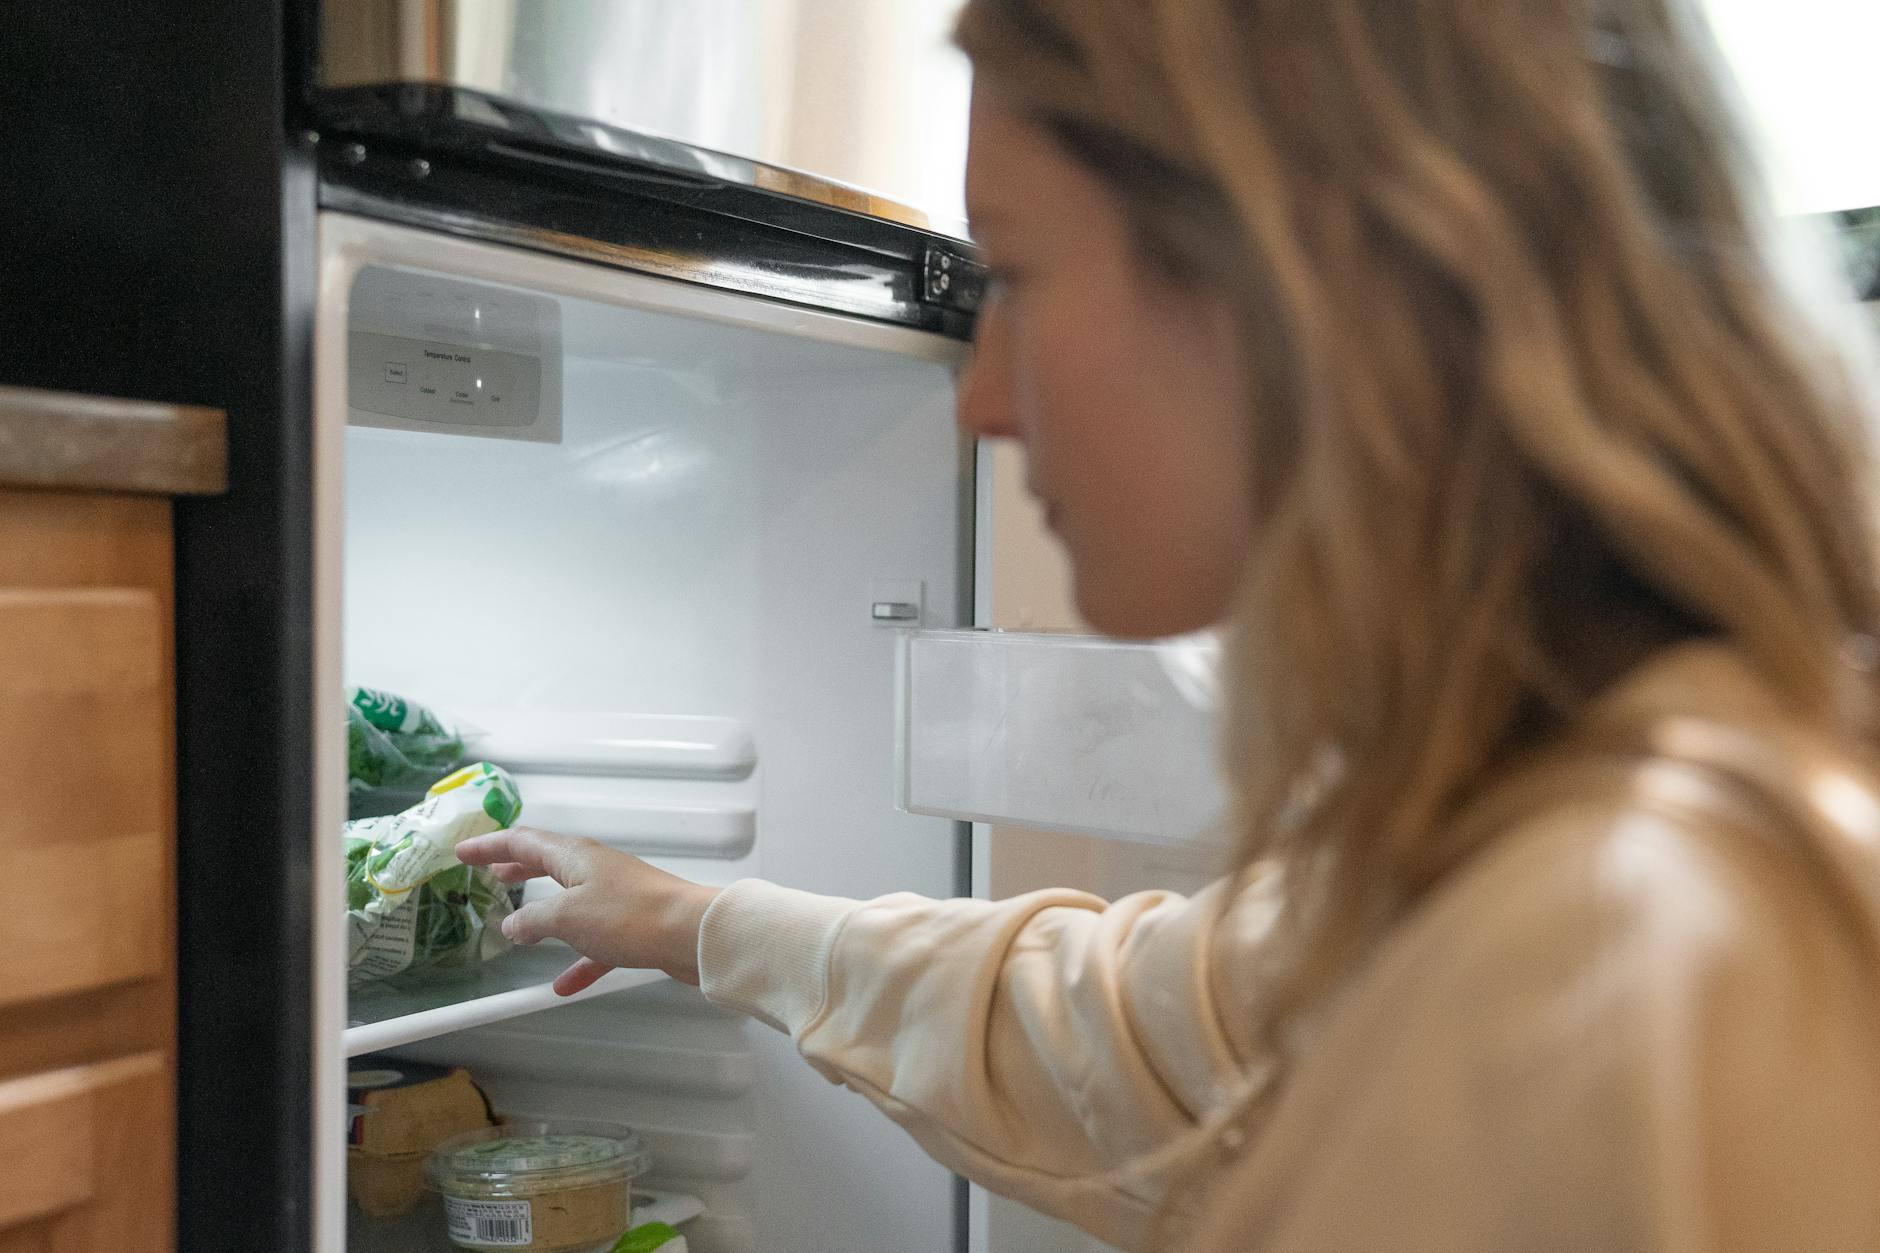 How Long Will Food Last In Refrigerator Without Power? | Fridge.com